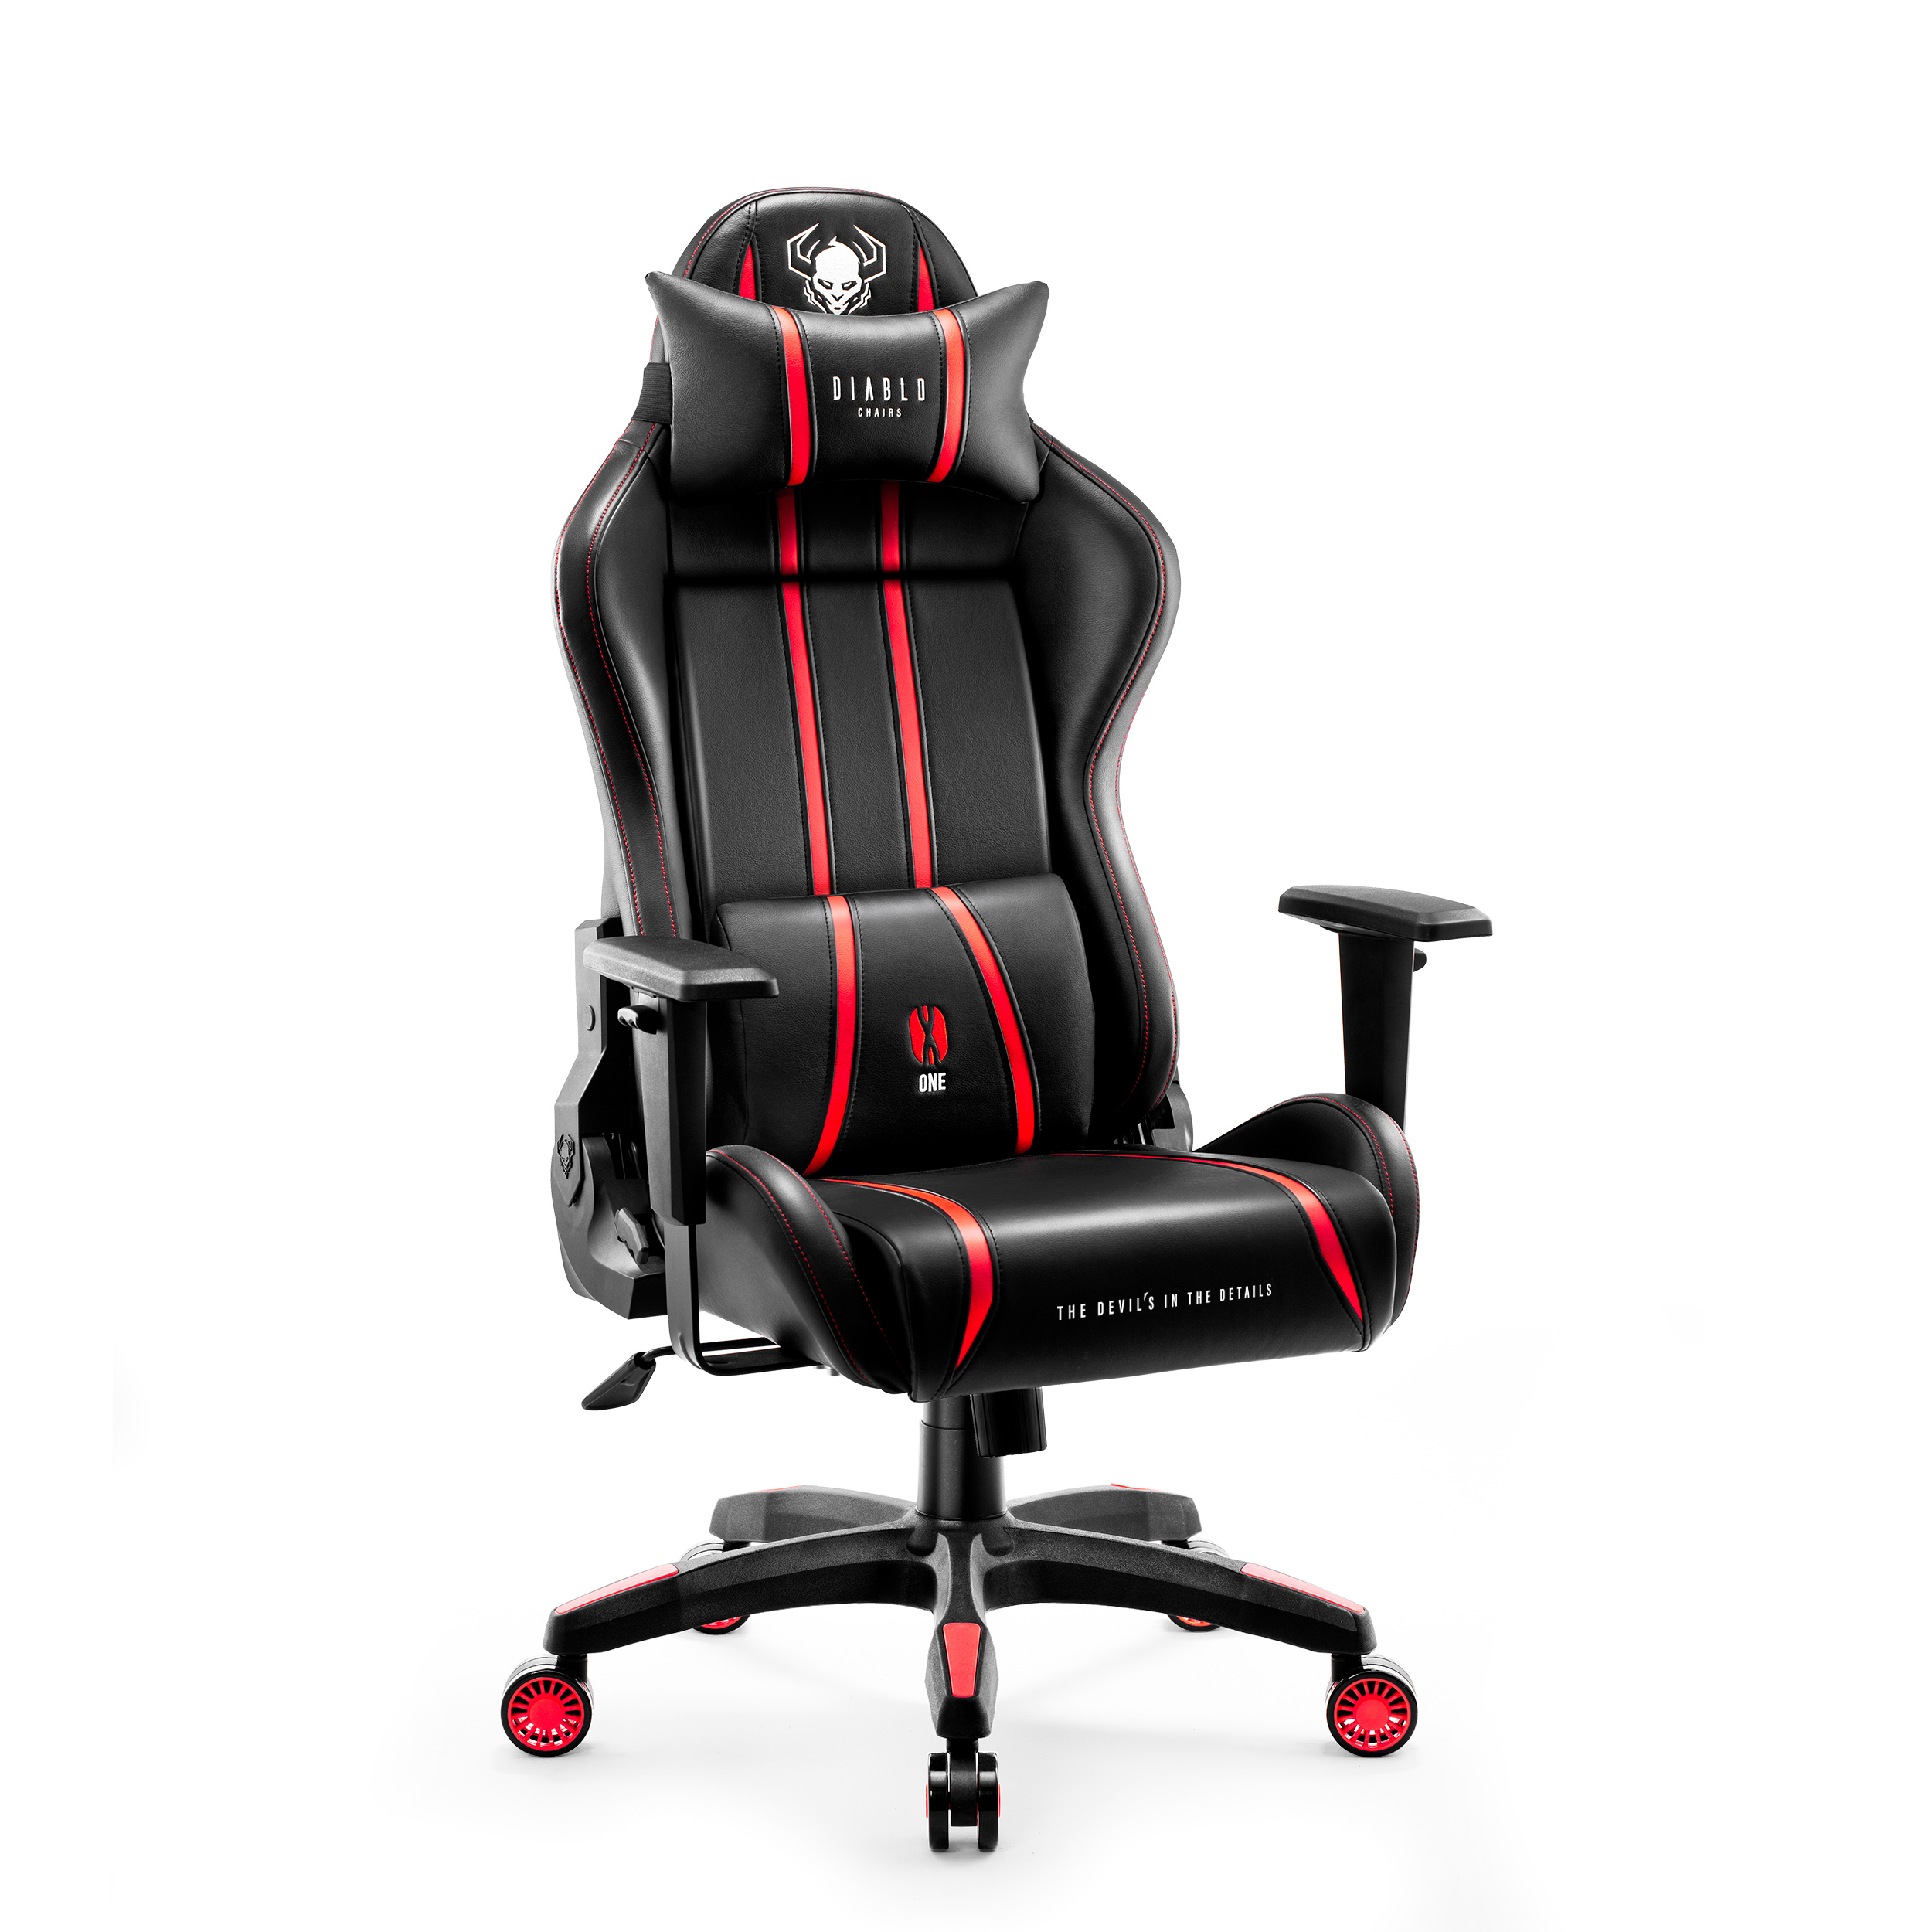 CHAIRS black/red X-ONE STUHL 2.0 Gaming Chair, NORMAL GAMING DIABLO